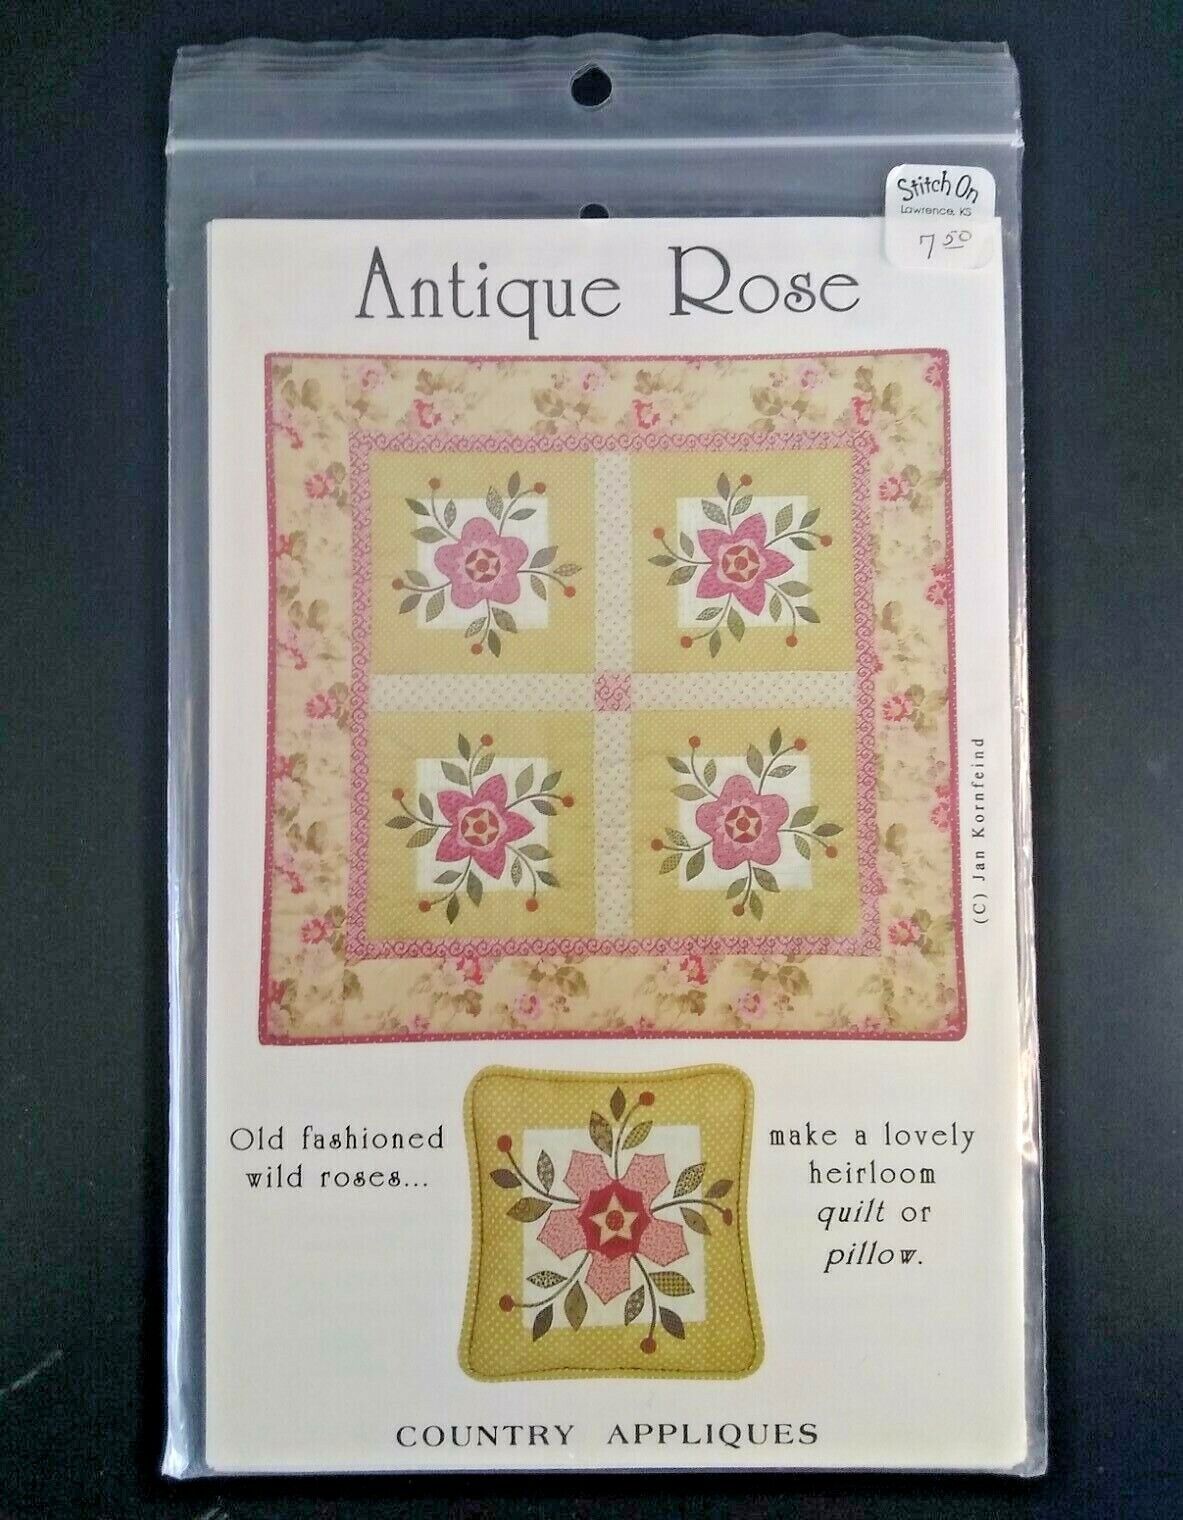 Antique Rose Heirloom Quilt Pattern Country Appliques 35.5"x35.5" Pillow CA-137 - $13.58